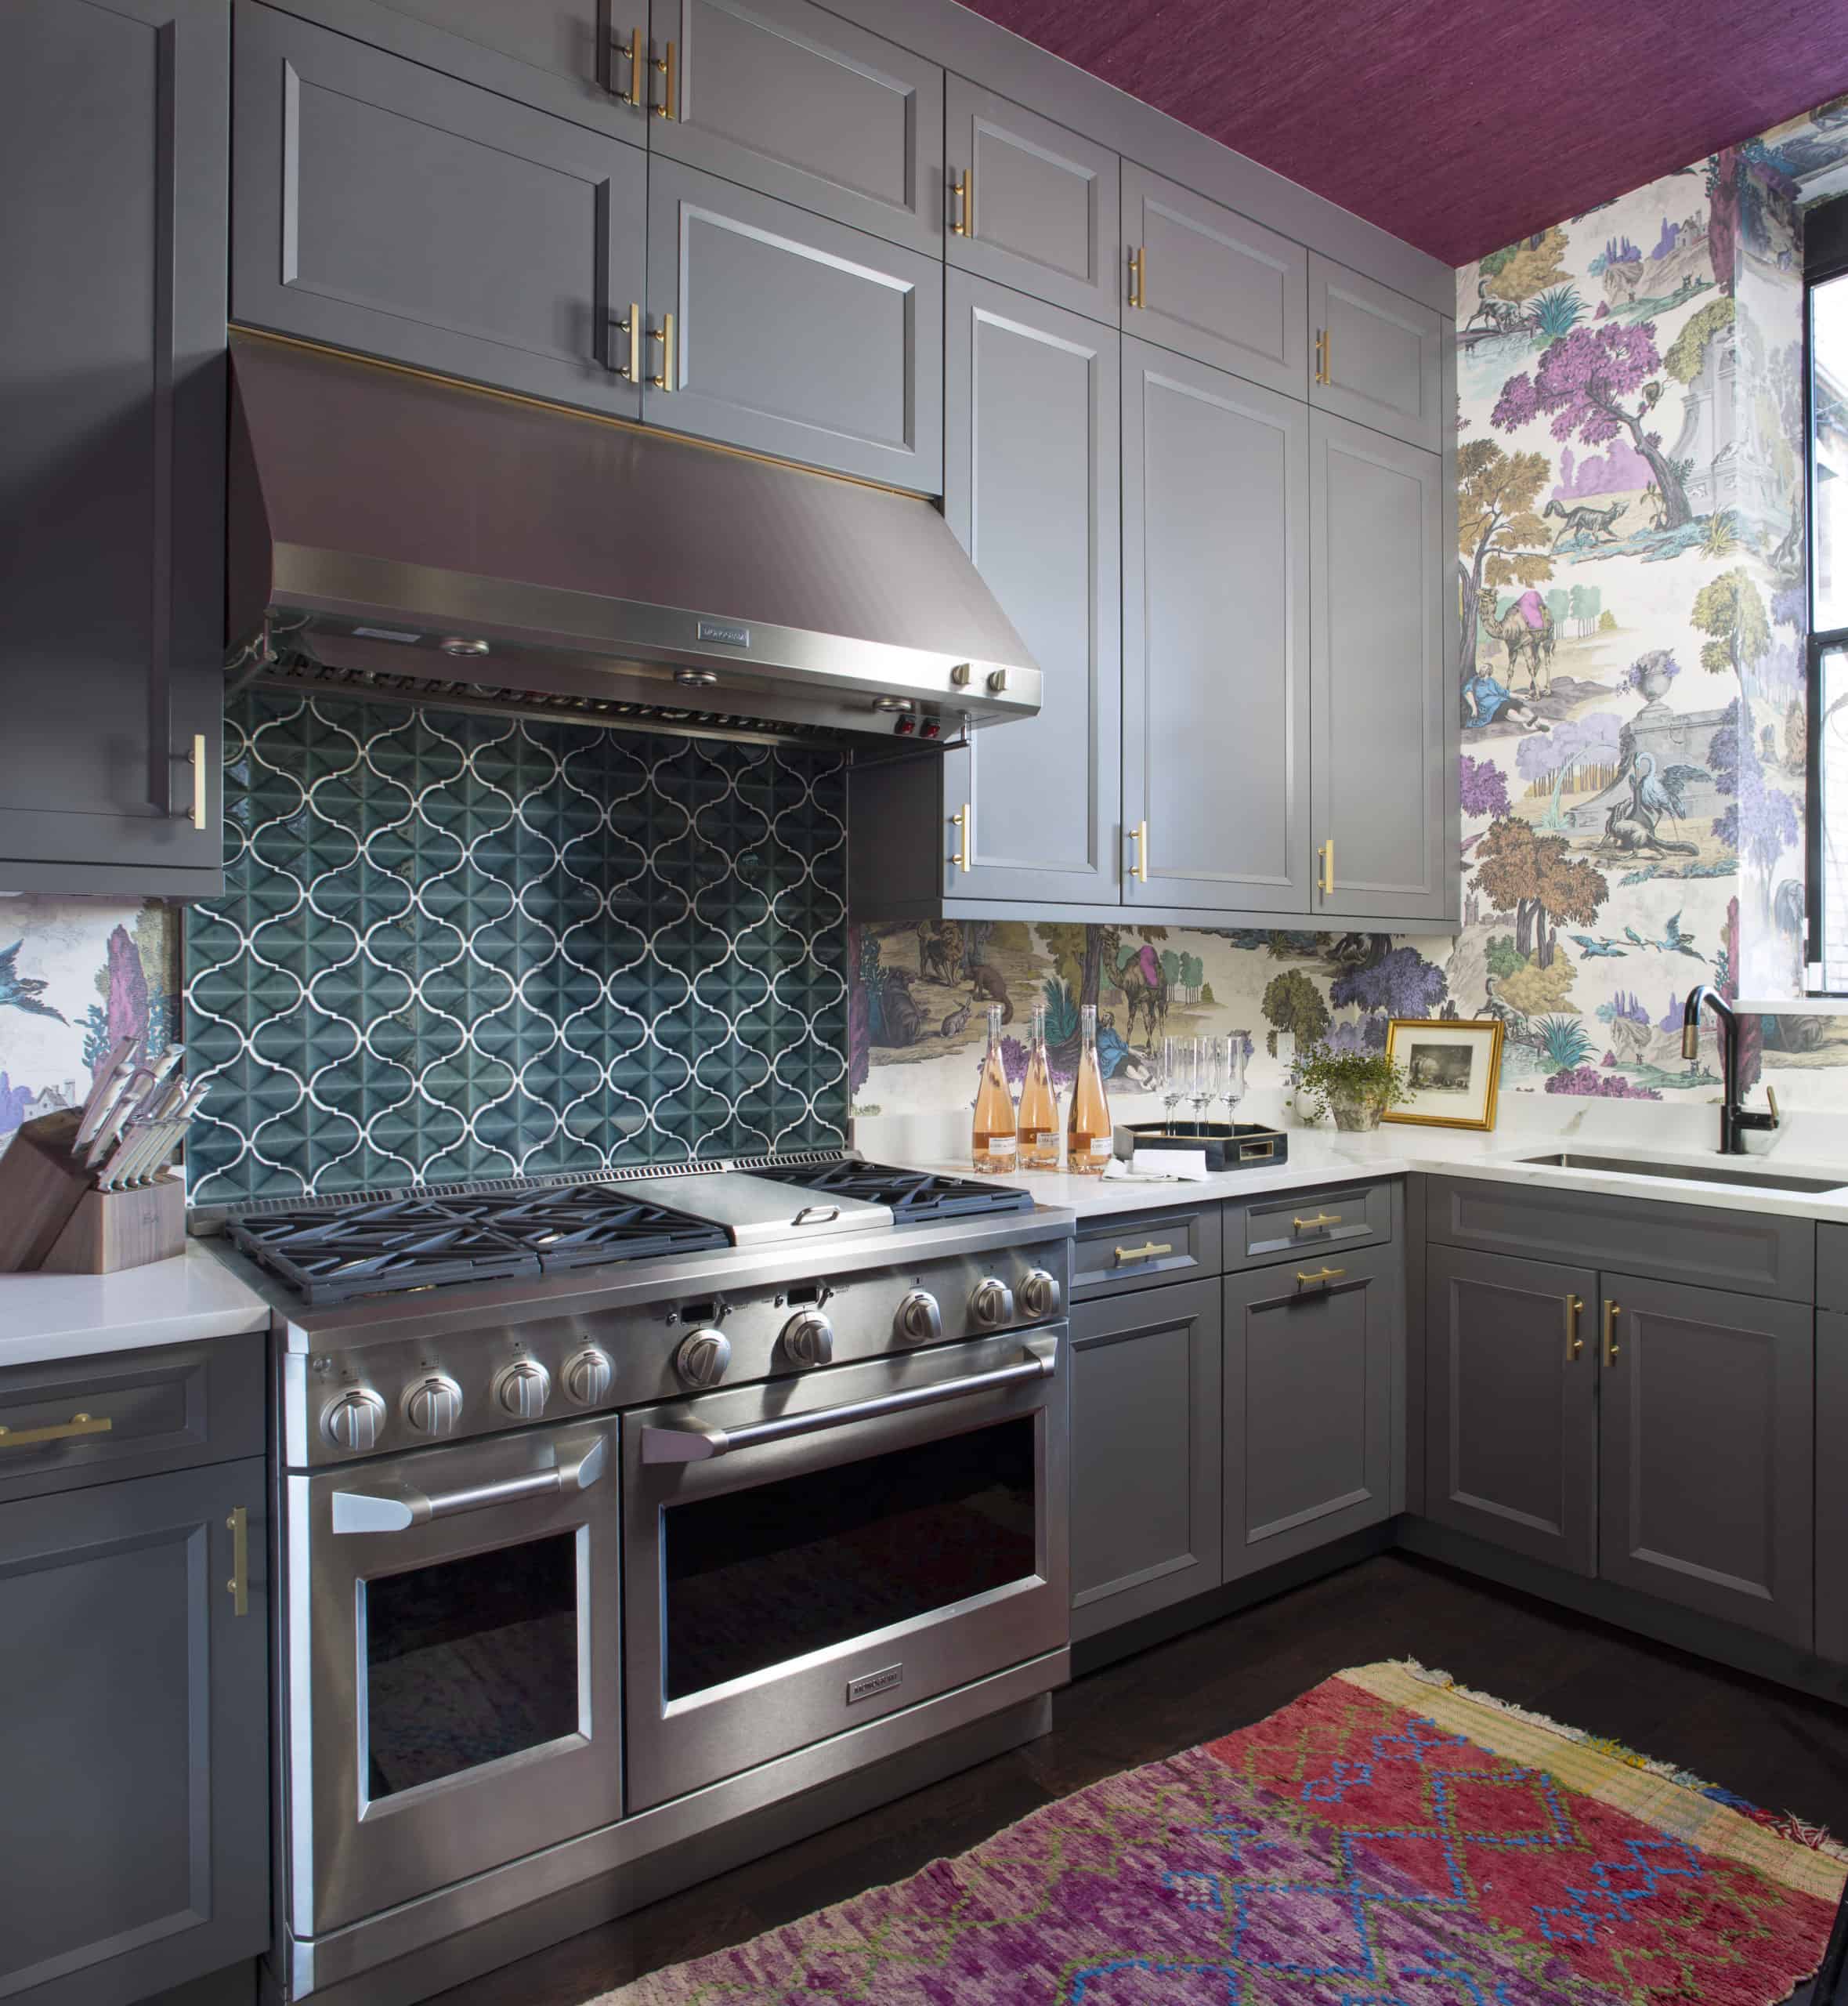 Stunning colorful kitchen finishes and high end appliances denver kitchen renovation